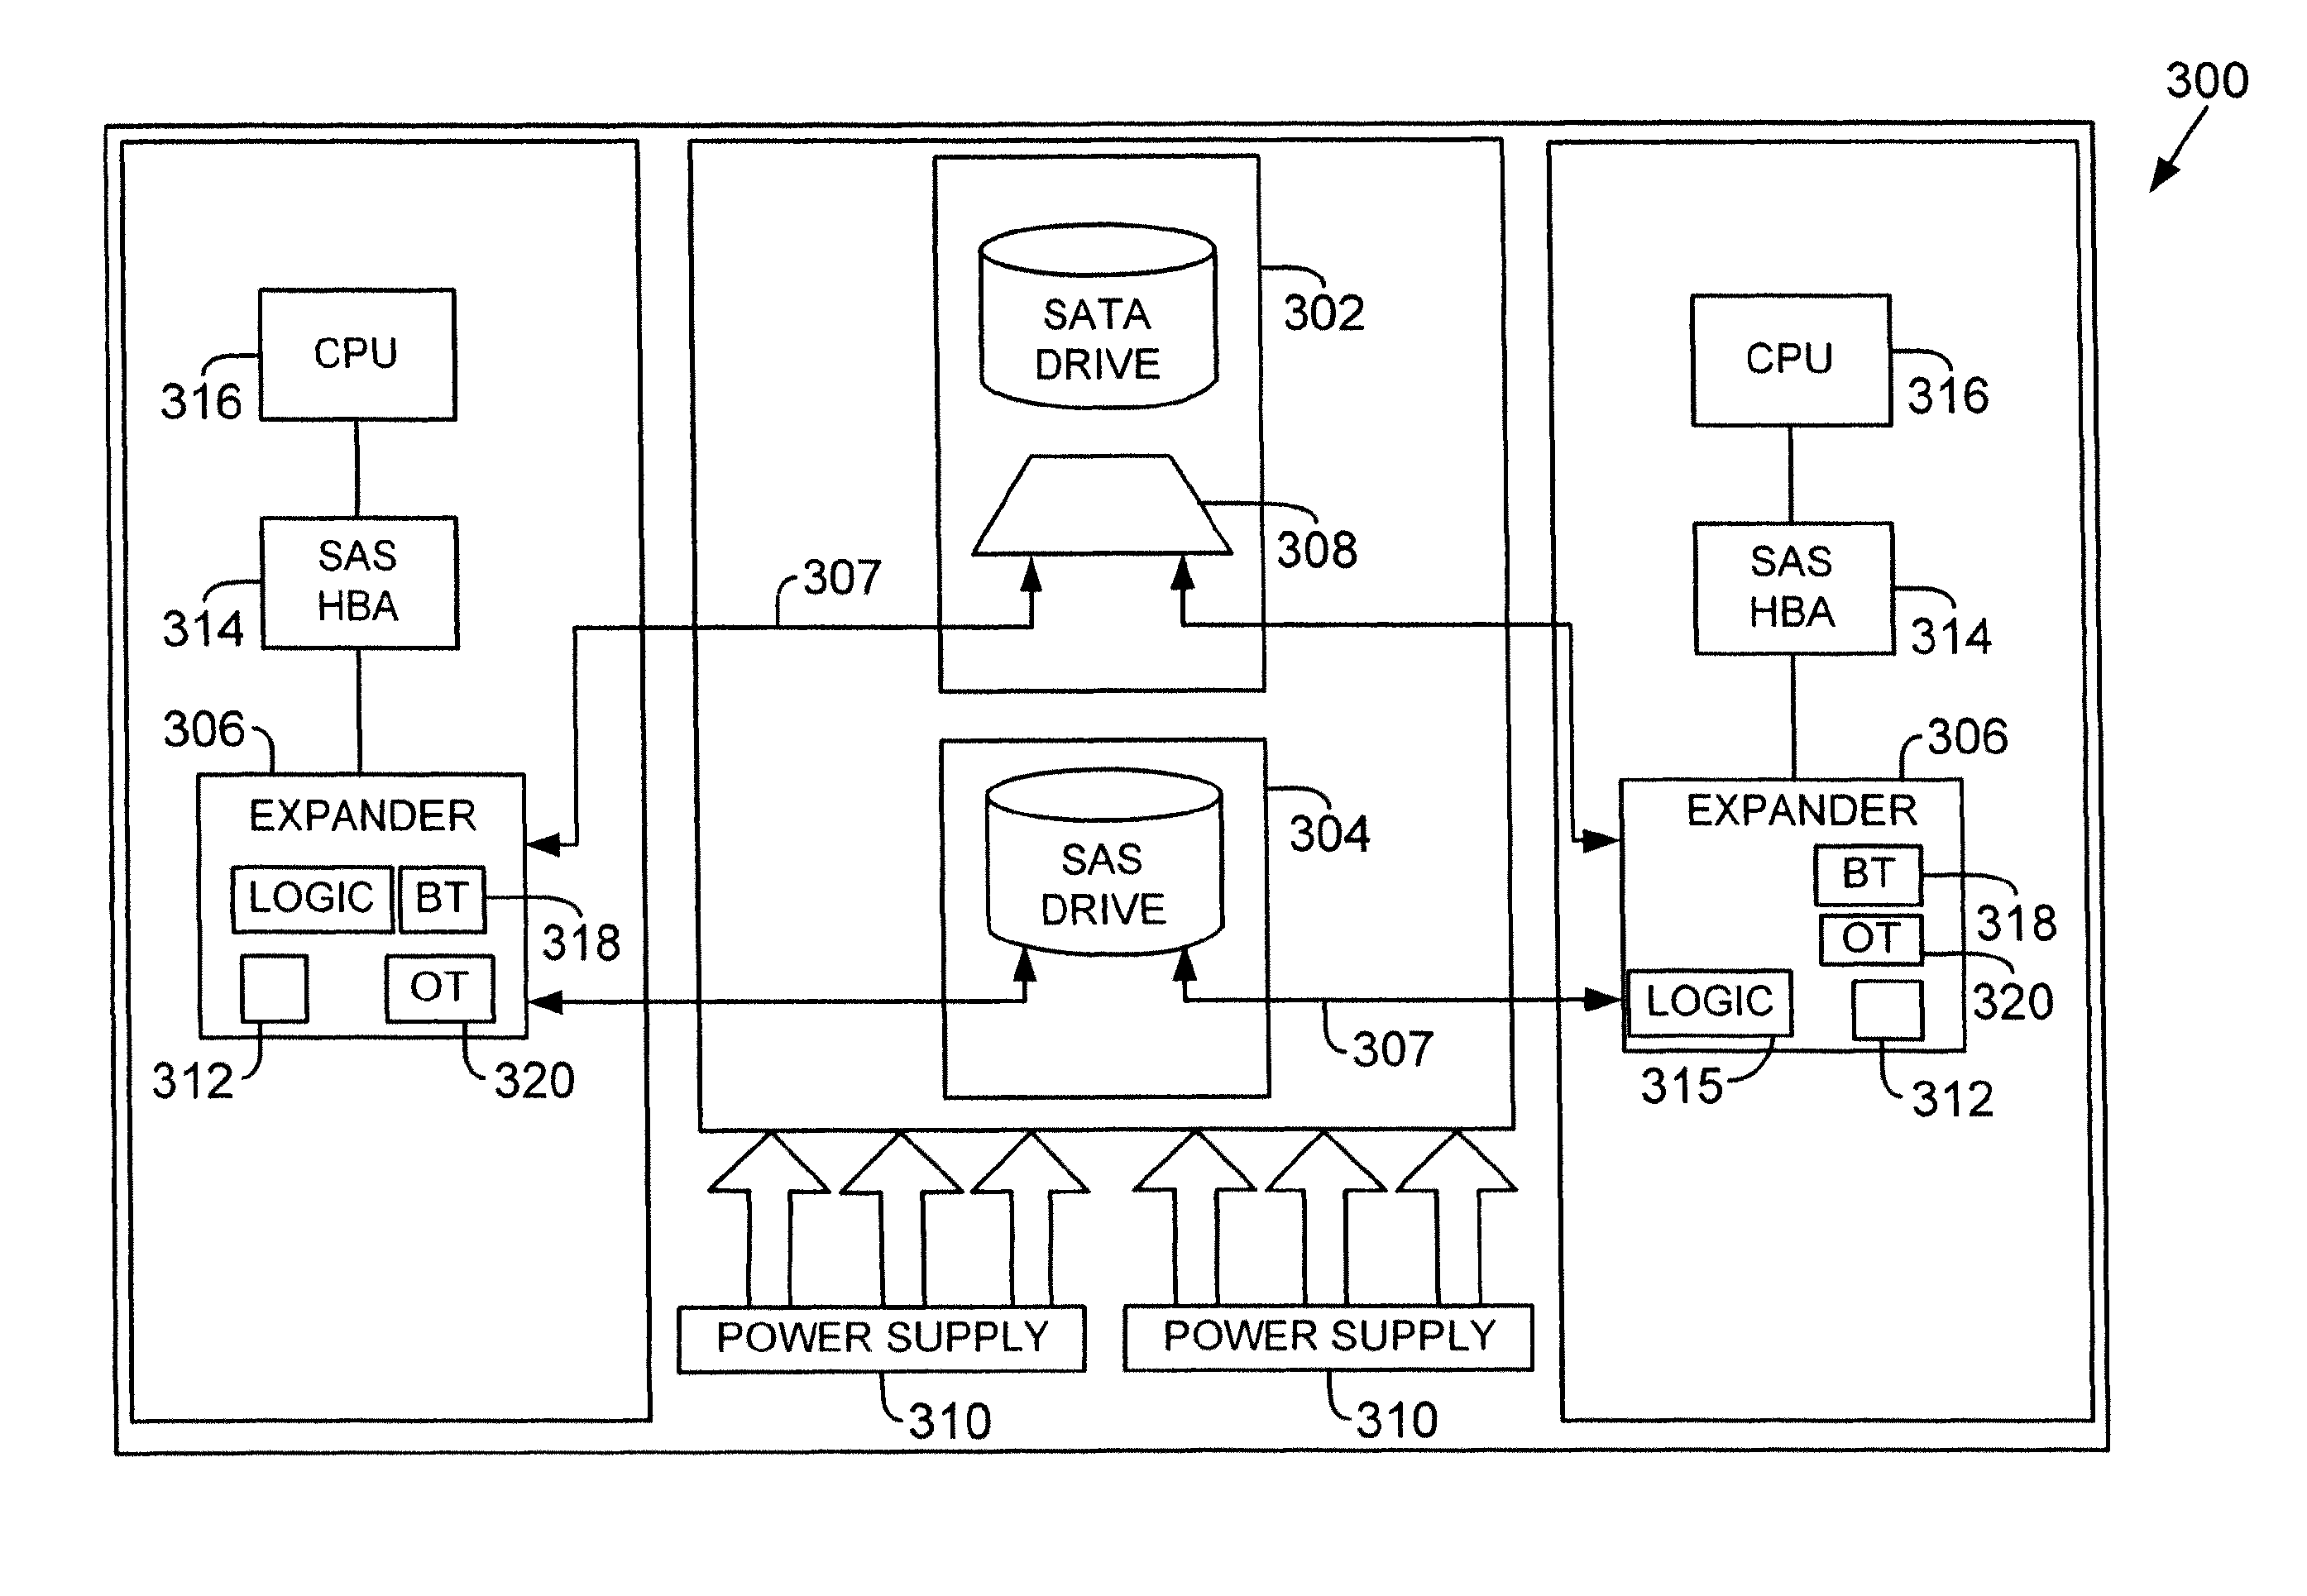 Method and system for minimizing unnecessary topology discovery operations by managing physical layer state change notifications in storage systems